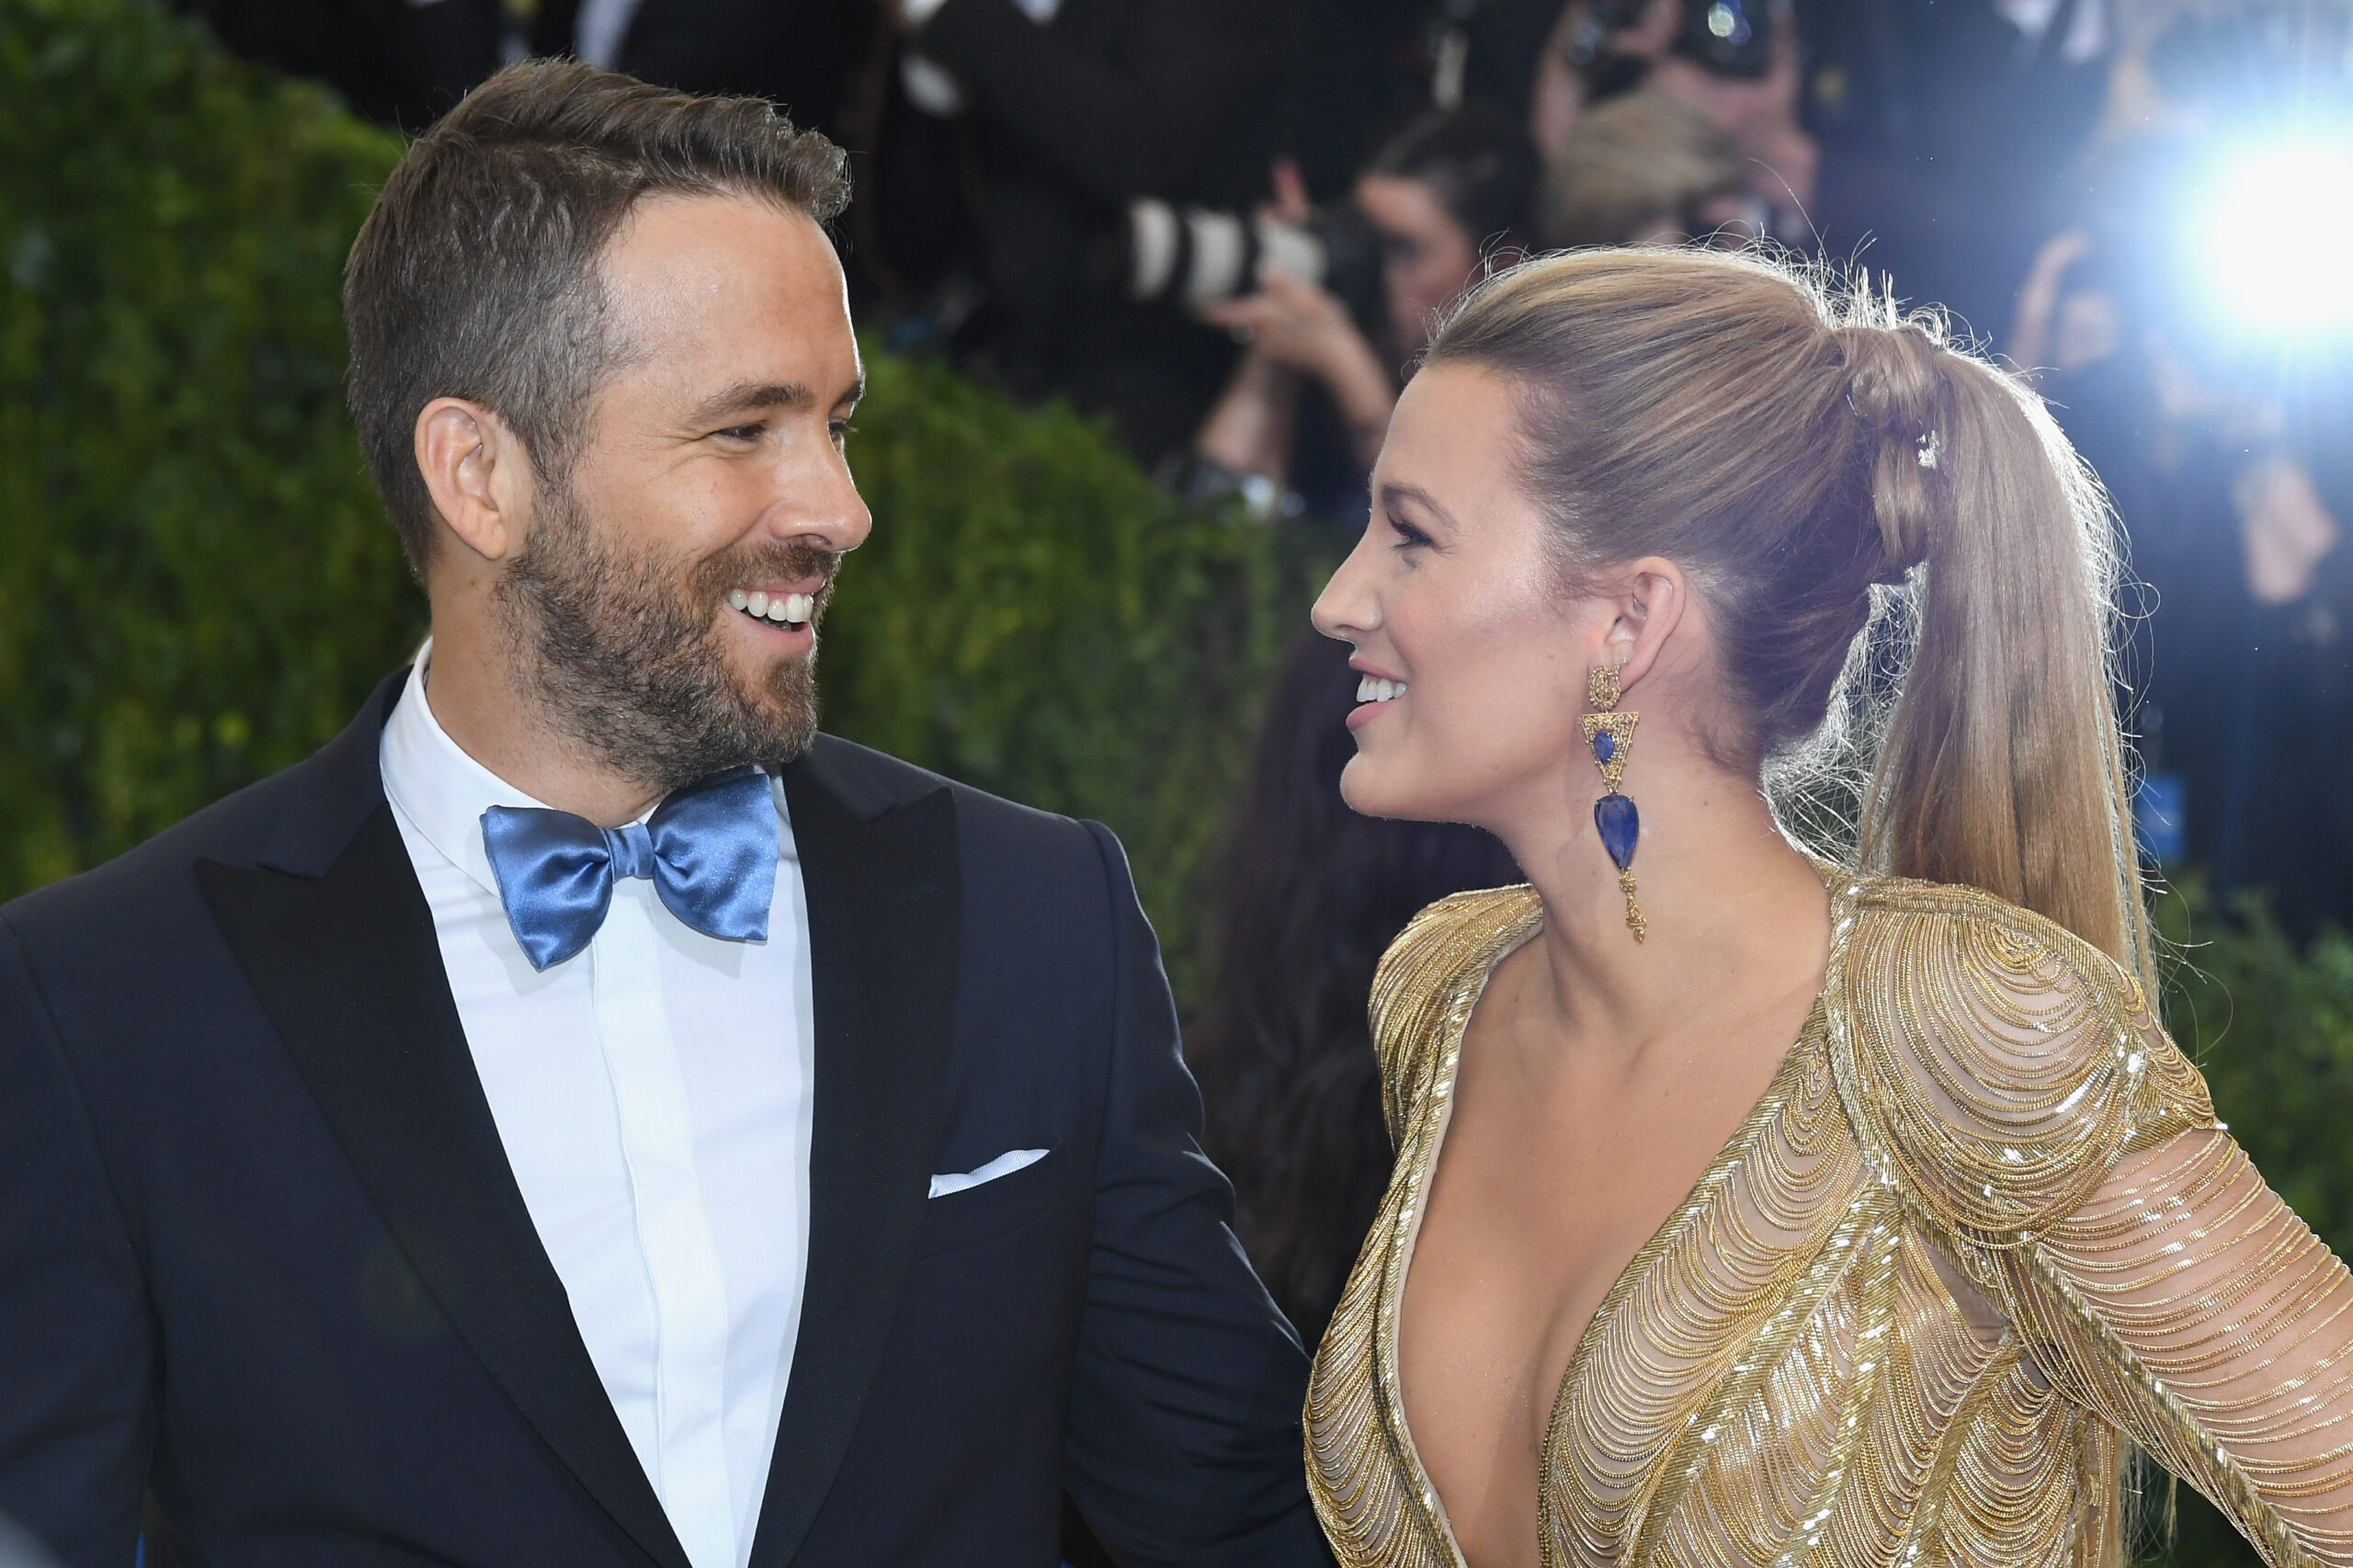 “His work ethic is…” – When Blake Lively’s Sister Brought Her and Ryan Reynolds’ Bond to the Spotlight